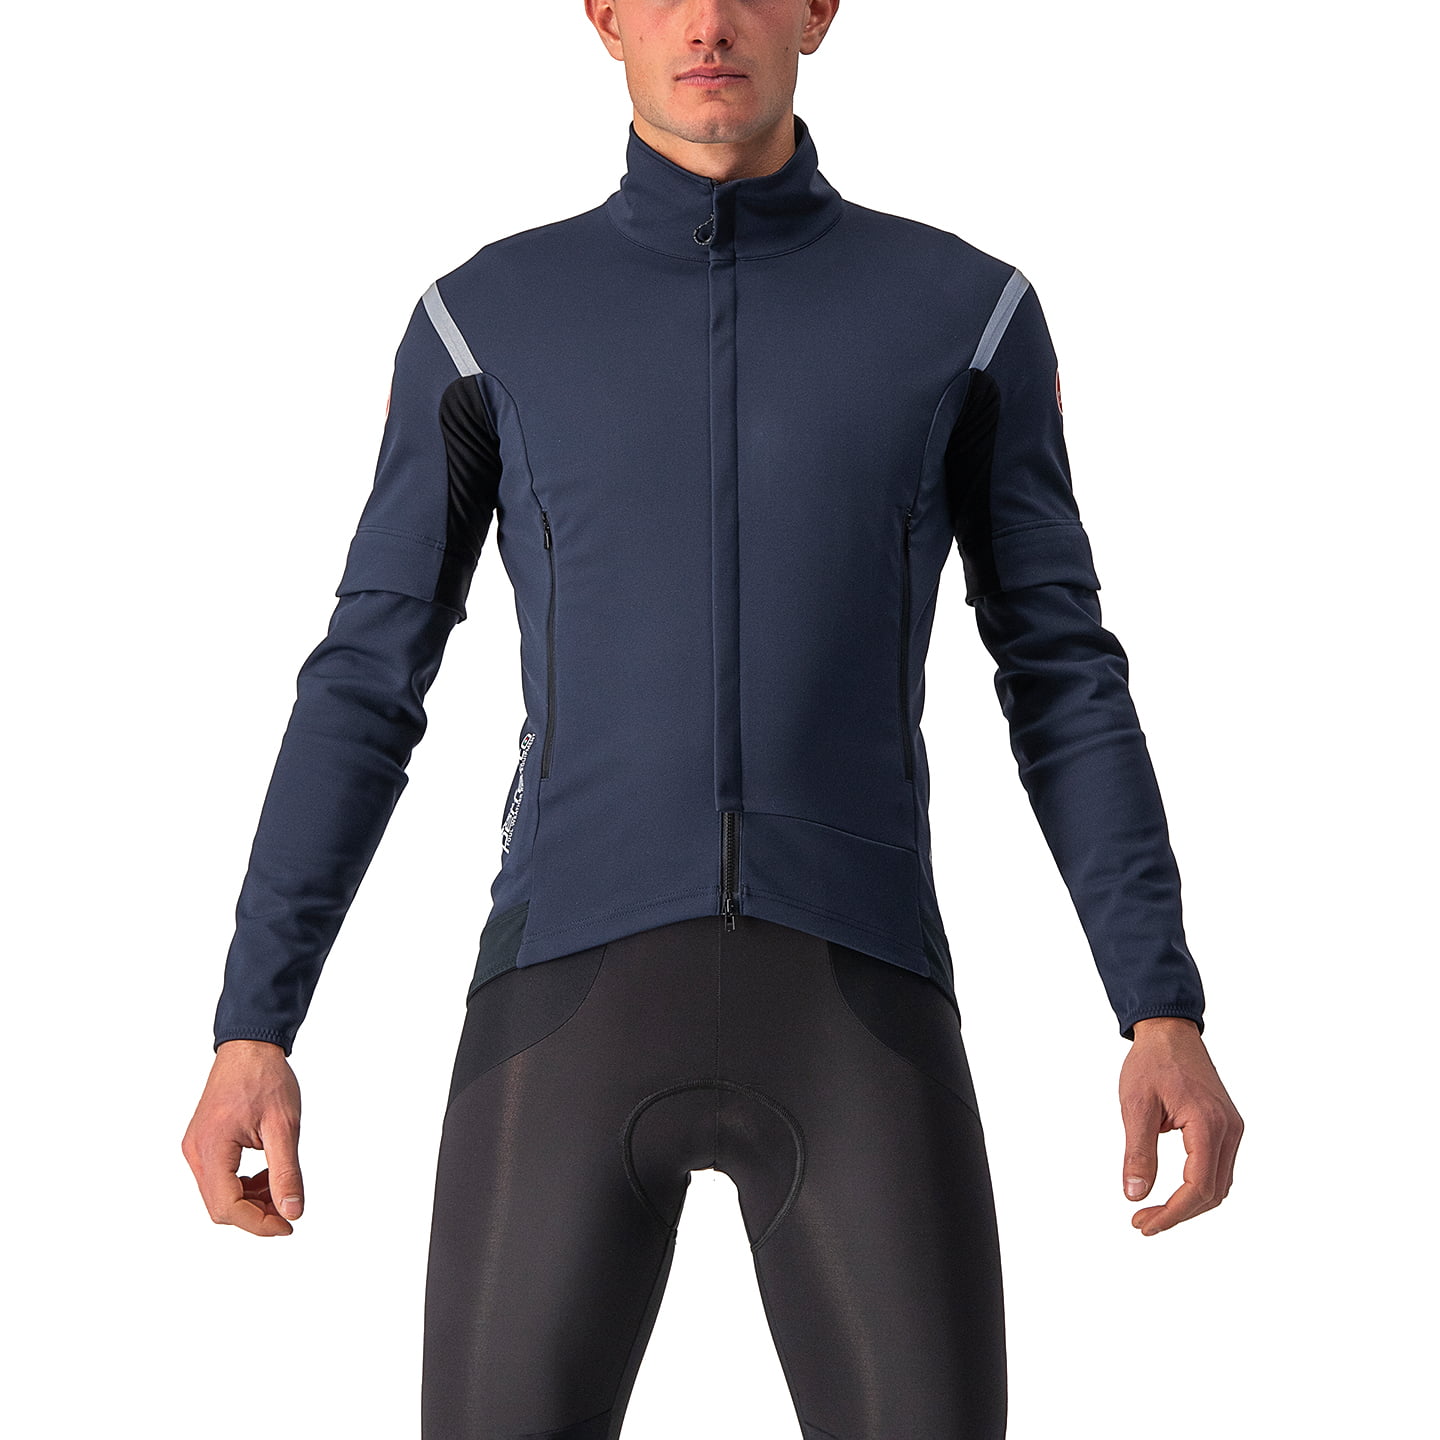 CASTELLI Perfetto RoS 2 Convertible Light Jacket Light Jacket, for men, size 2XL, Cycle jacket, Cycling clothing